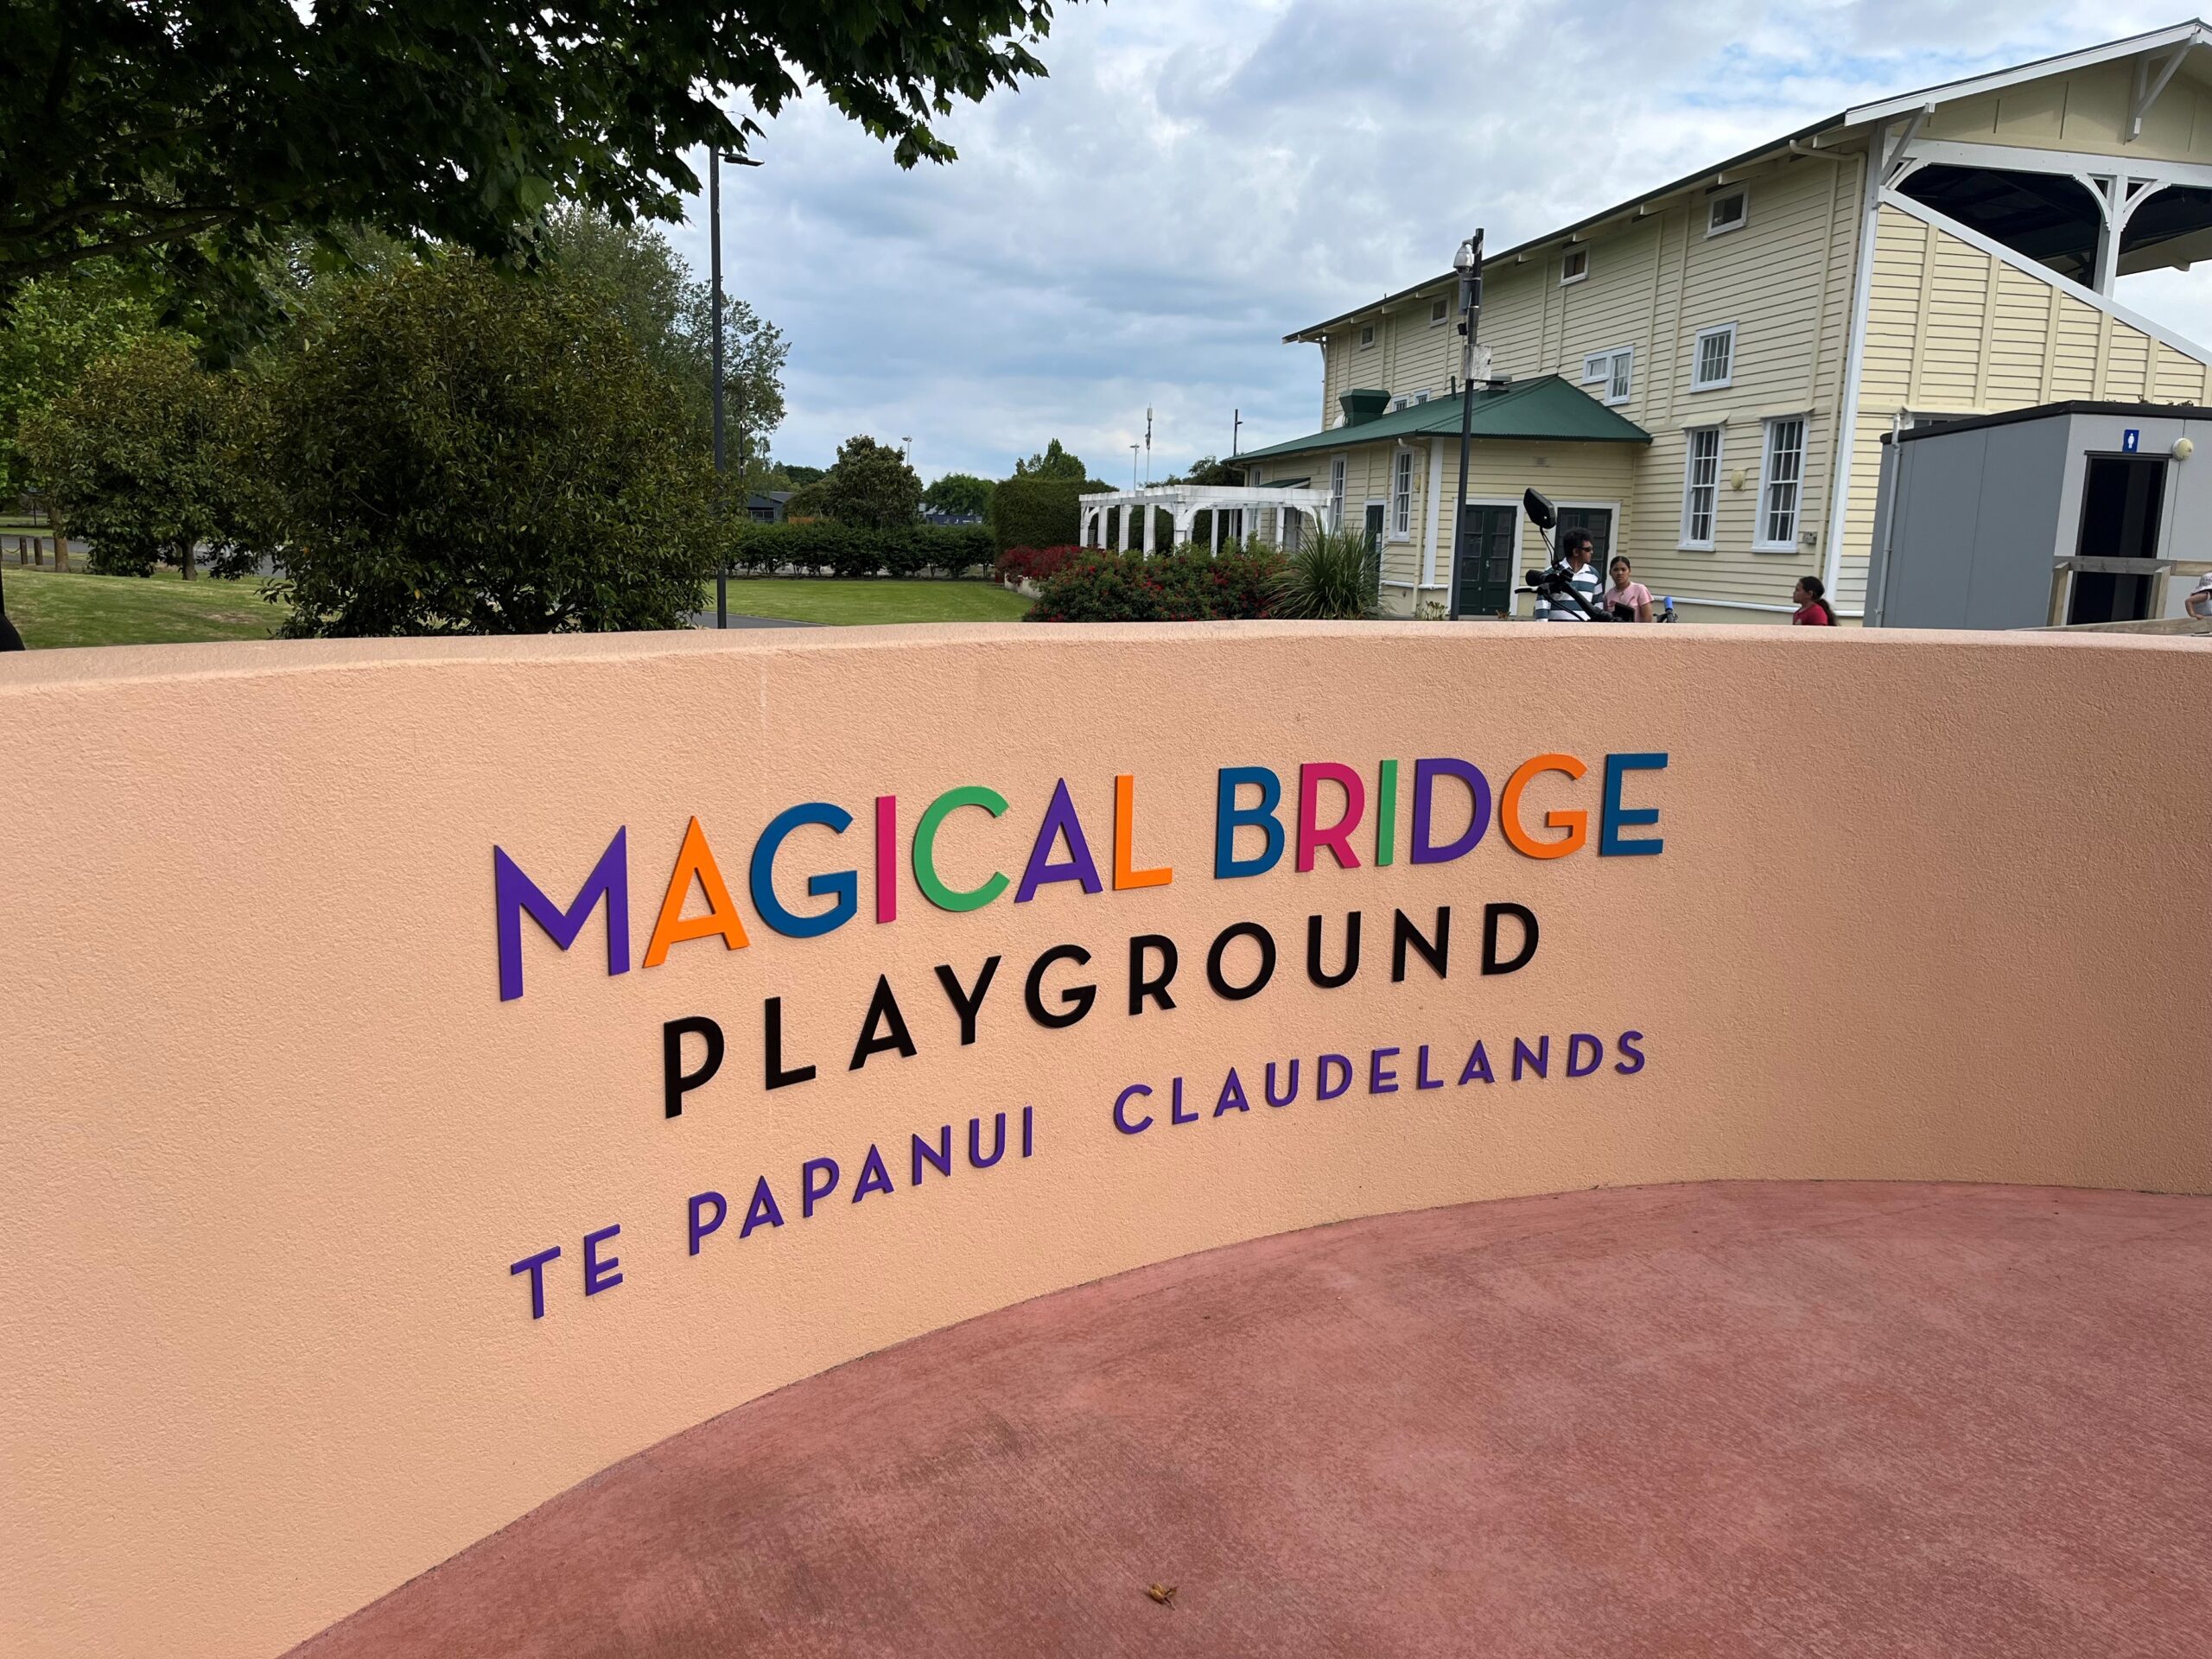 The welcome sign of the Magical Bridge Playground - Te Papanui Claudelands.